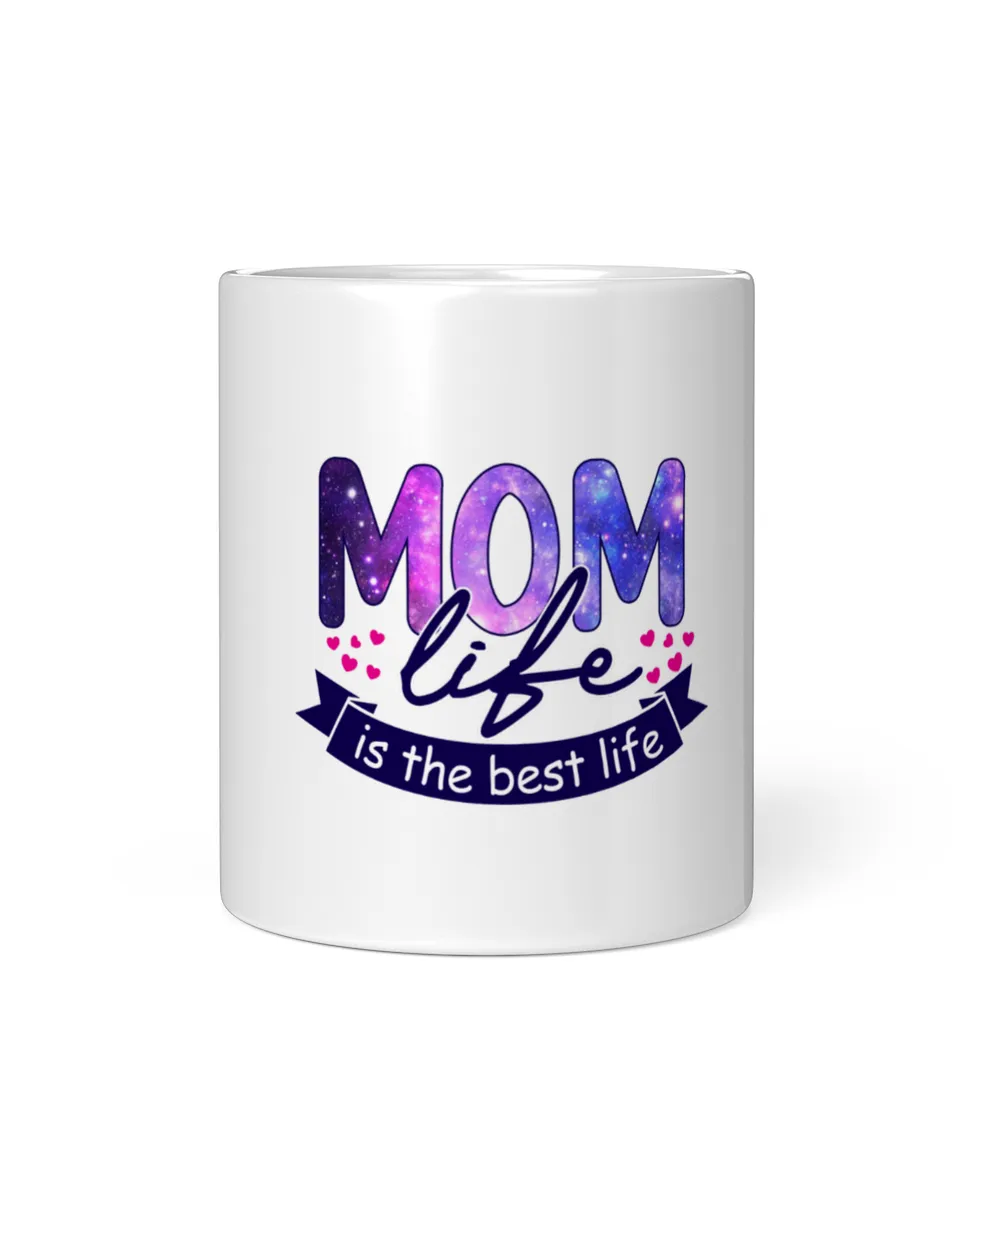 RD Mother Day Gift, Mom Life Is The Best Life Tee, Mom Gift, Mama Shirt, Best Mom Ever, Mother Day 2022 Shirt